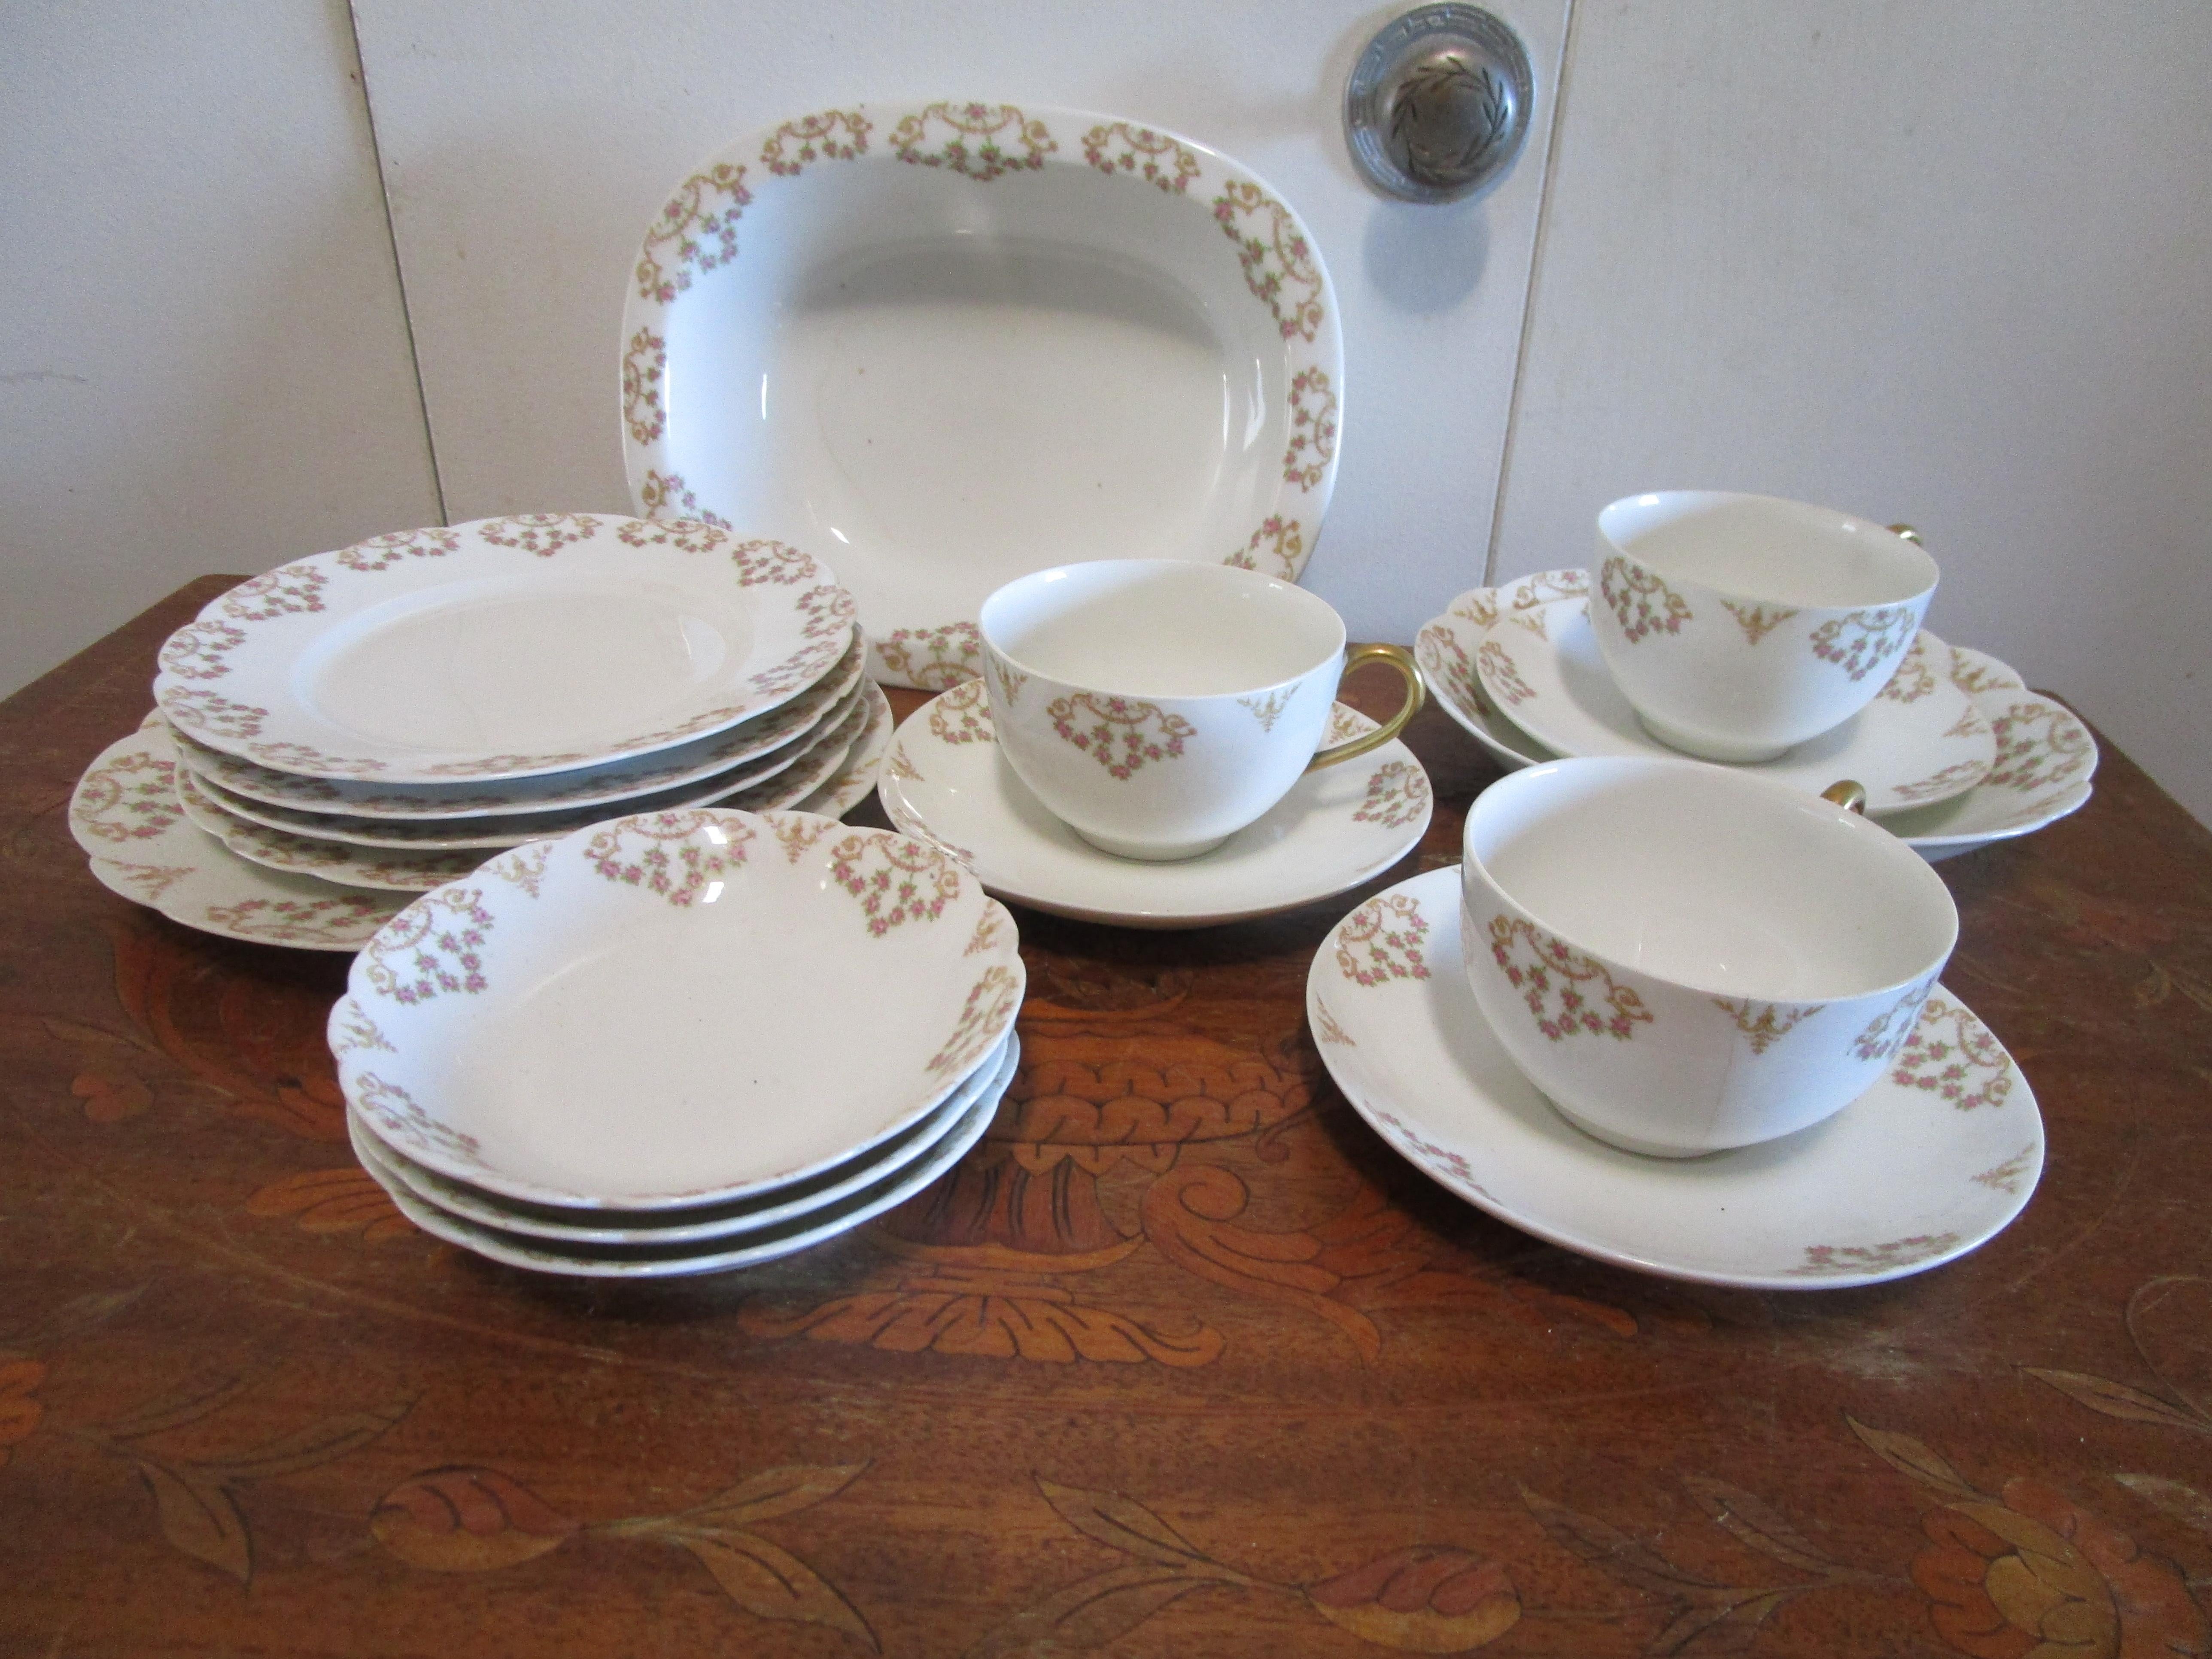 Beautiful antique pieces of Limoges china, elegant and near mint condition, can complete an existing set or complement an unrelated set of white china. Pattern is TRV087. This small collection of 17 pieces is exquisite. There are three cups with